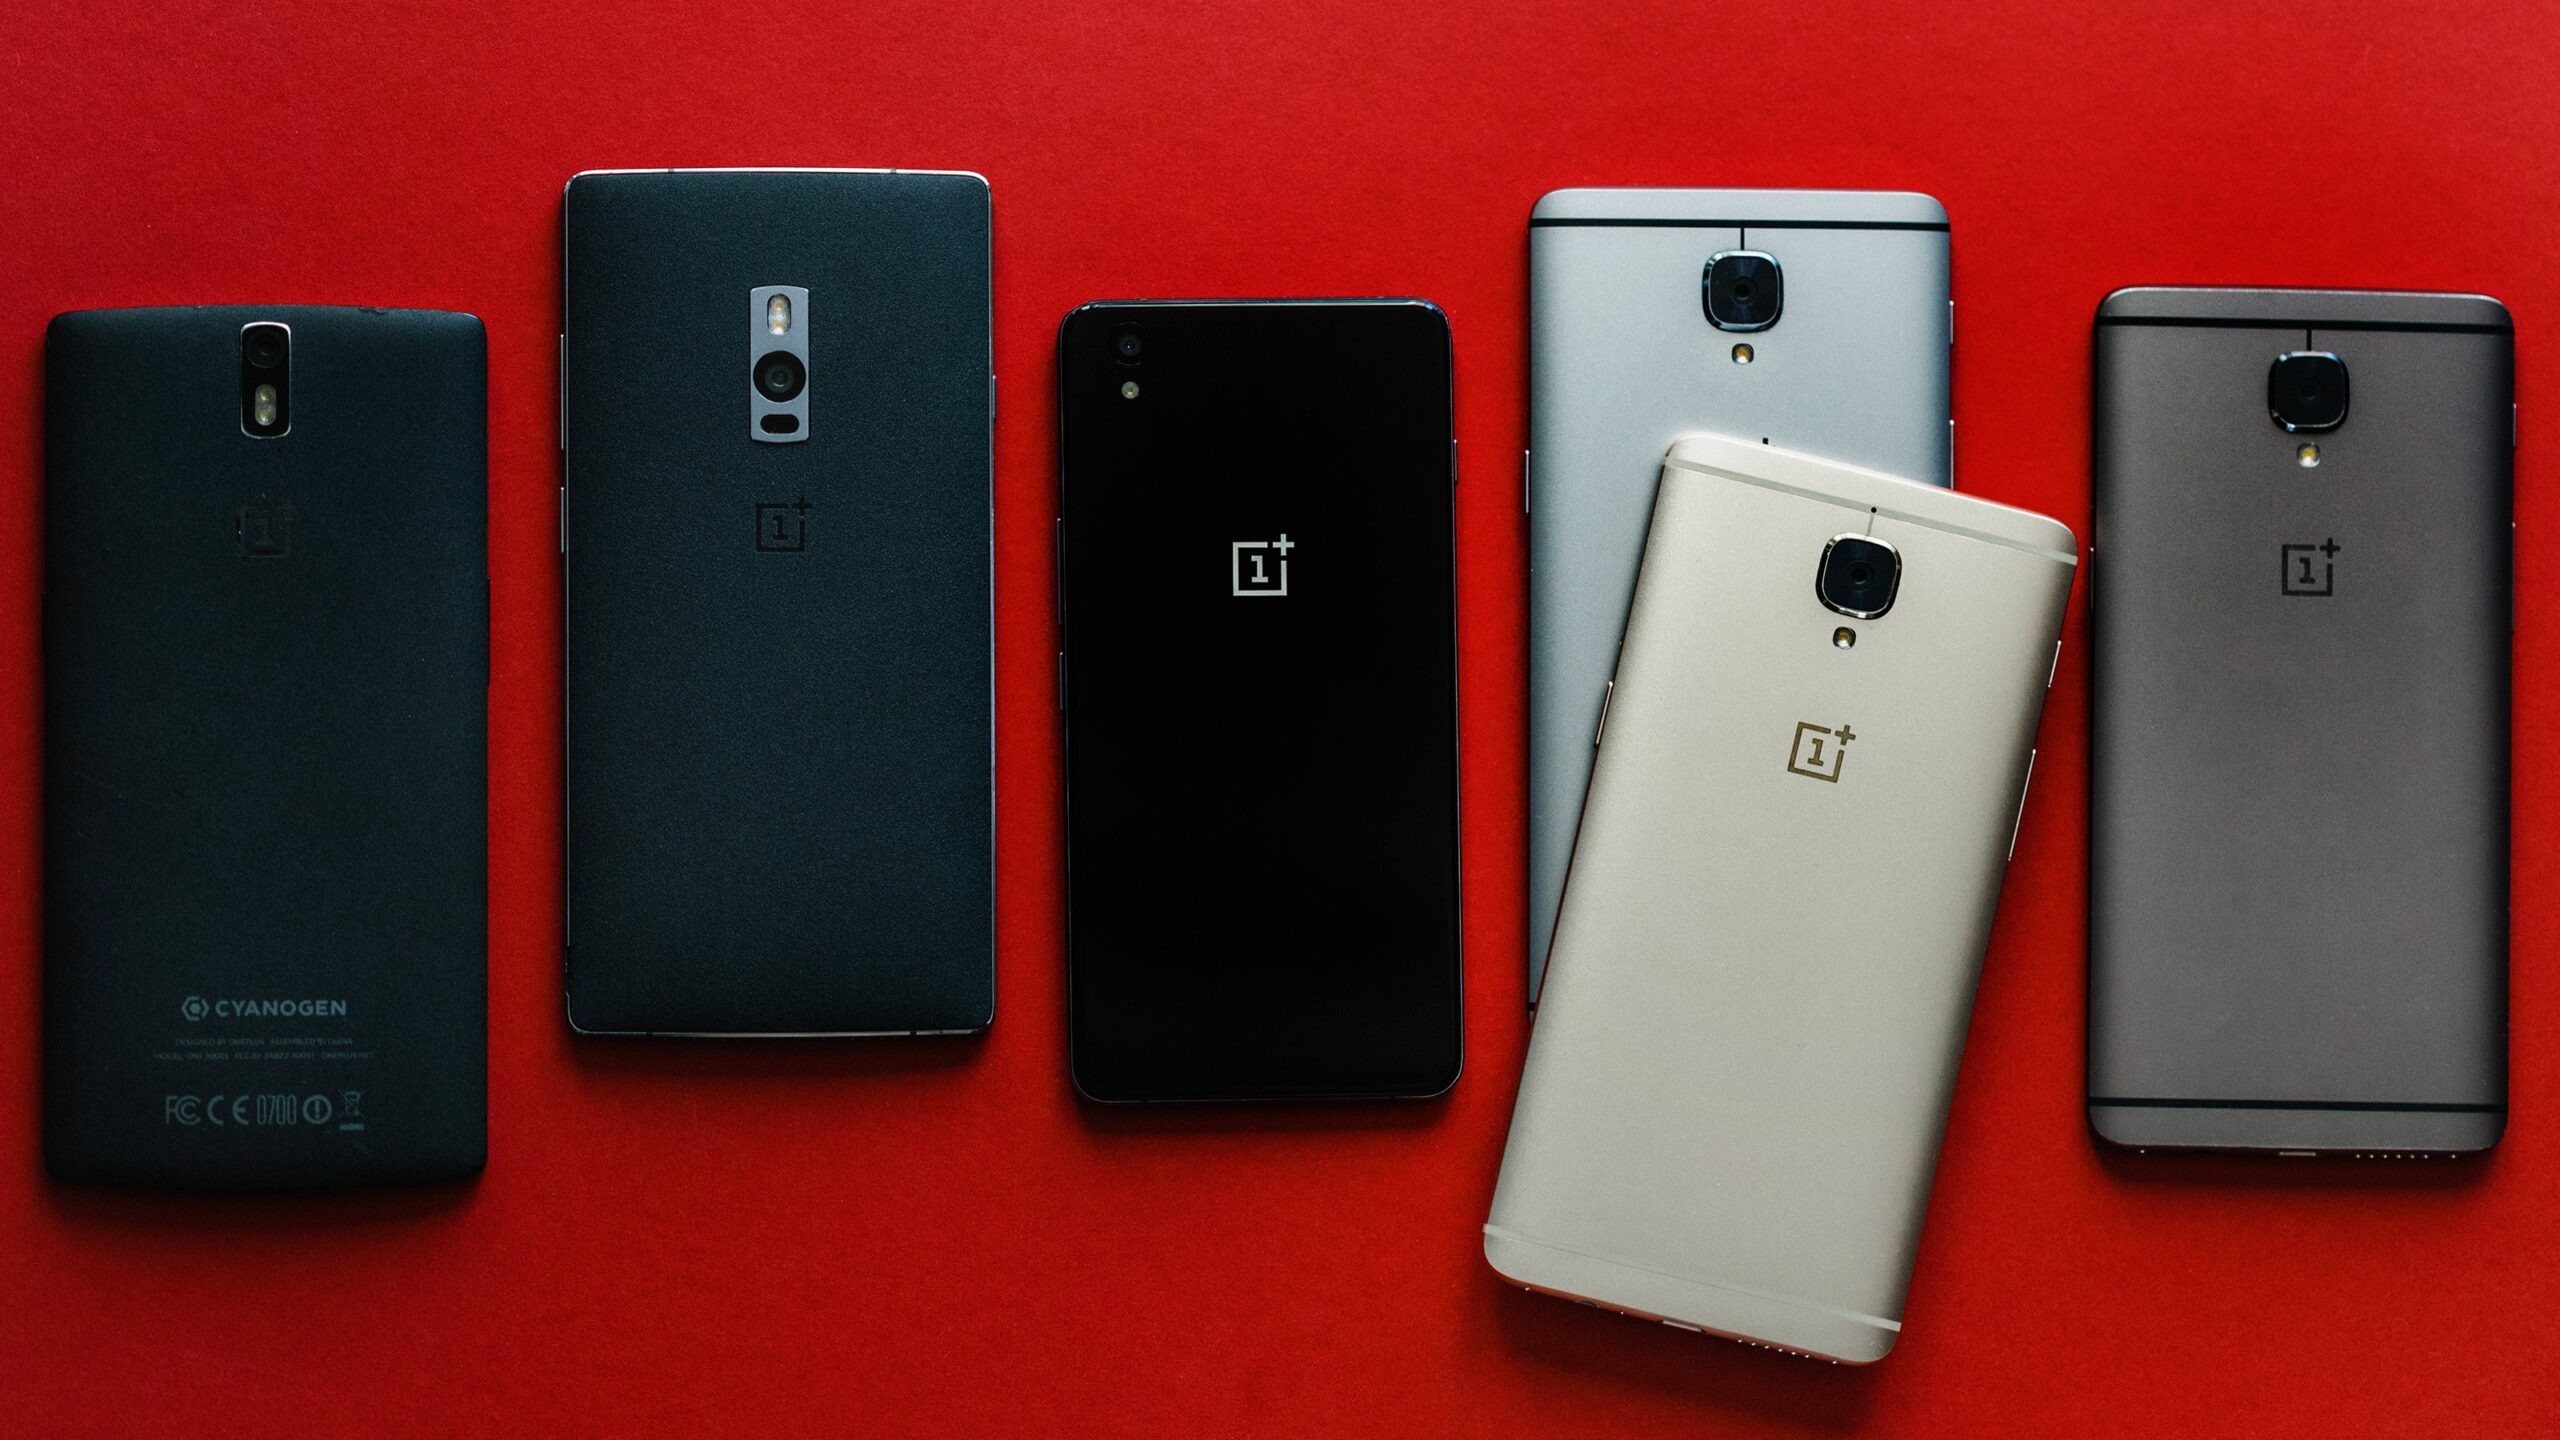 The evolution of the OnePlus family to OnePlus 6T